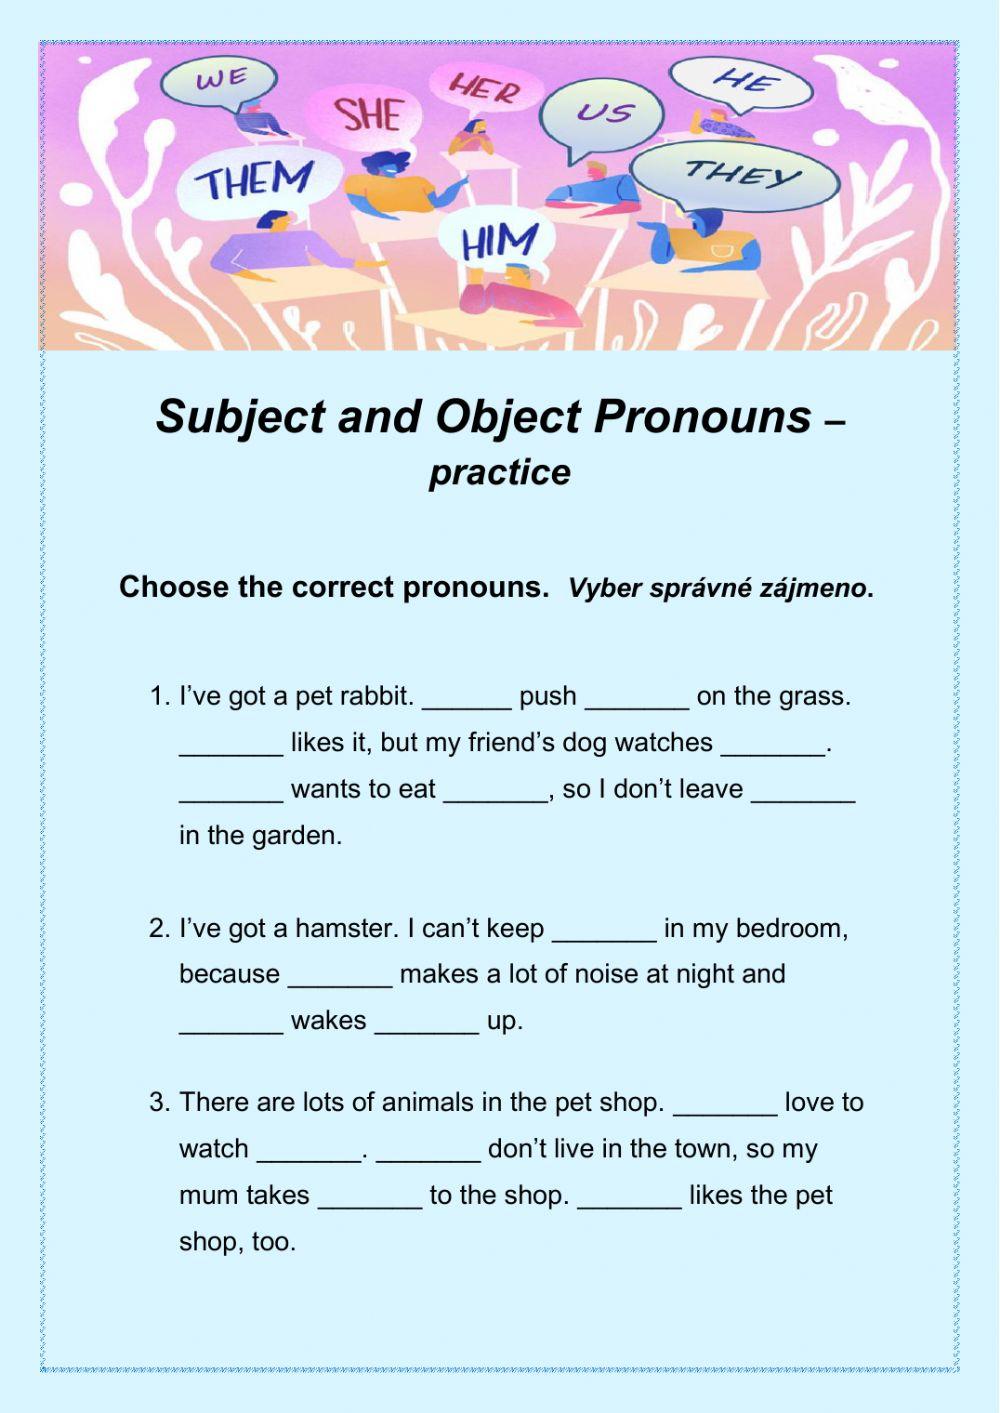 Subject and Object Pronouns practice